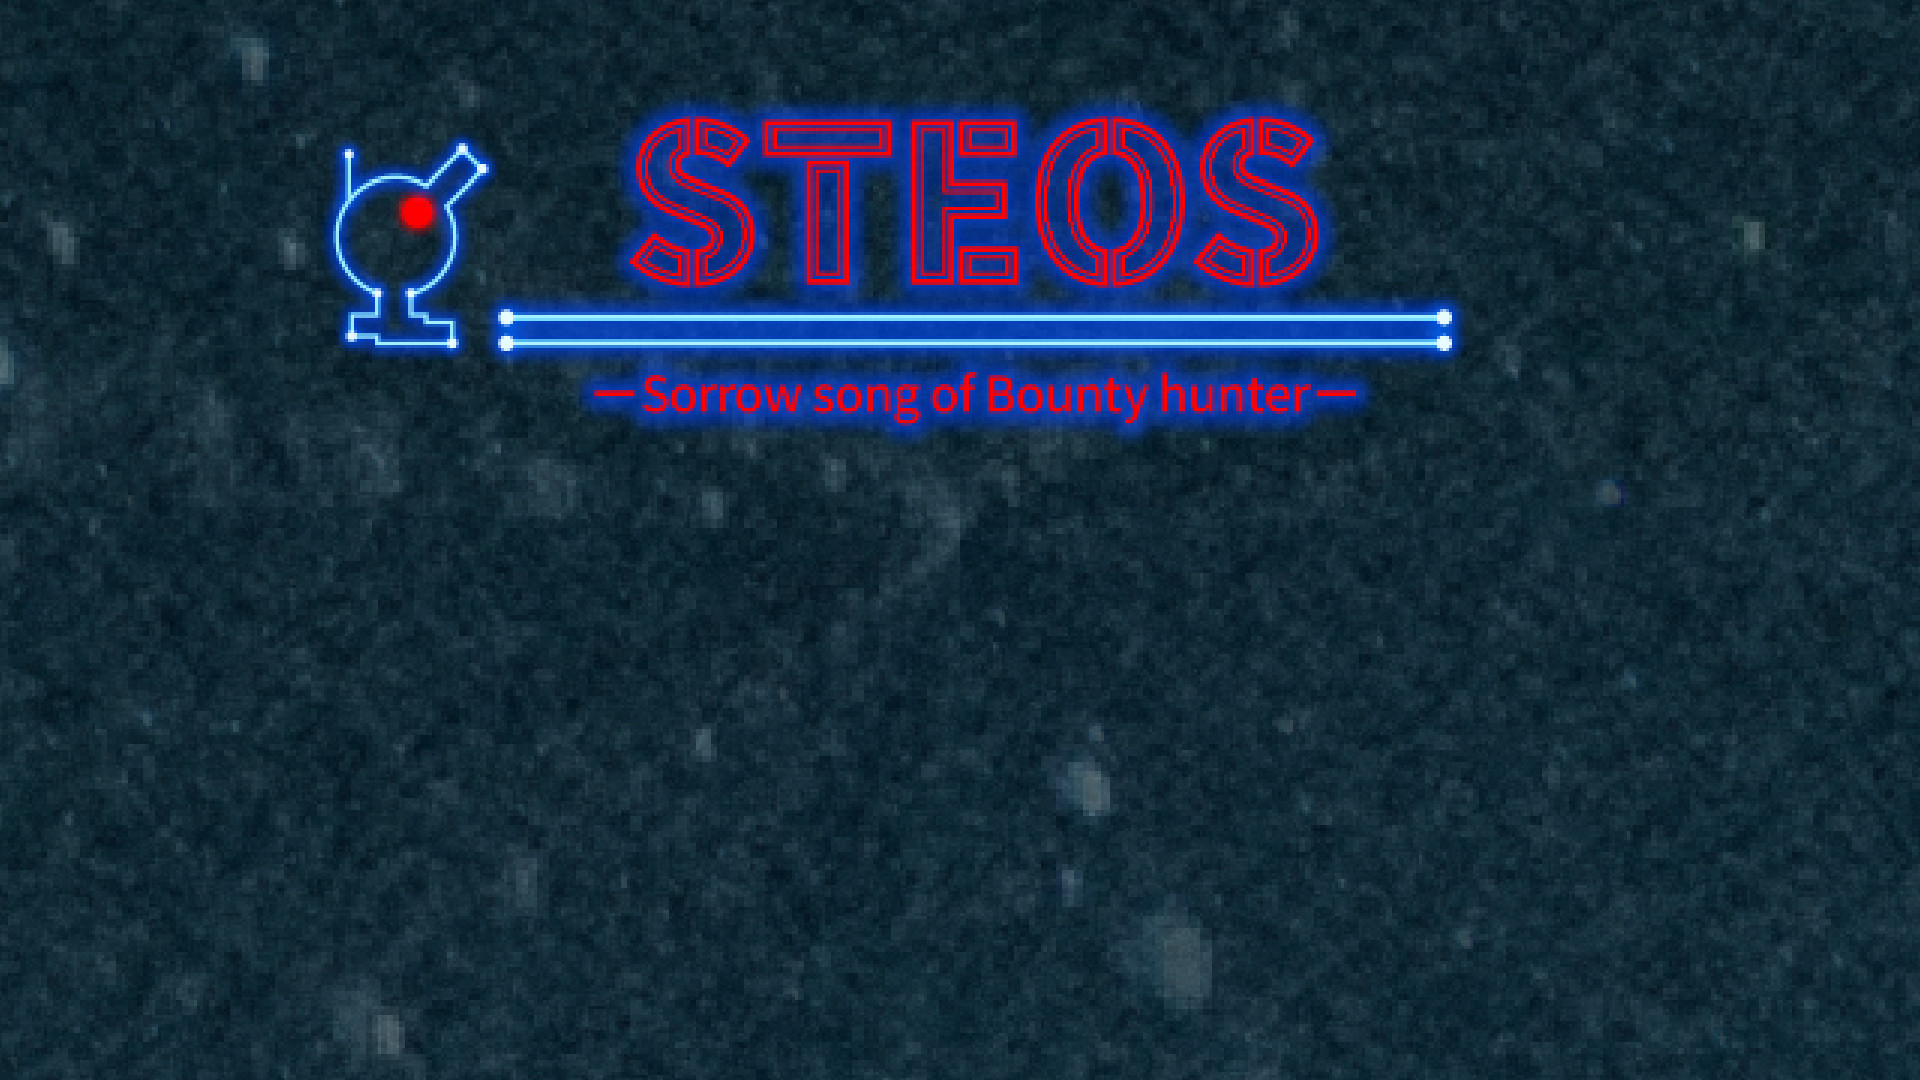 Pixel Game Maker Series STEOS -Sorrow song of Bounty hunter- Soundtrack Featured Screenshot #1